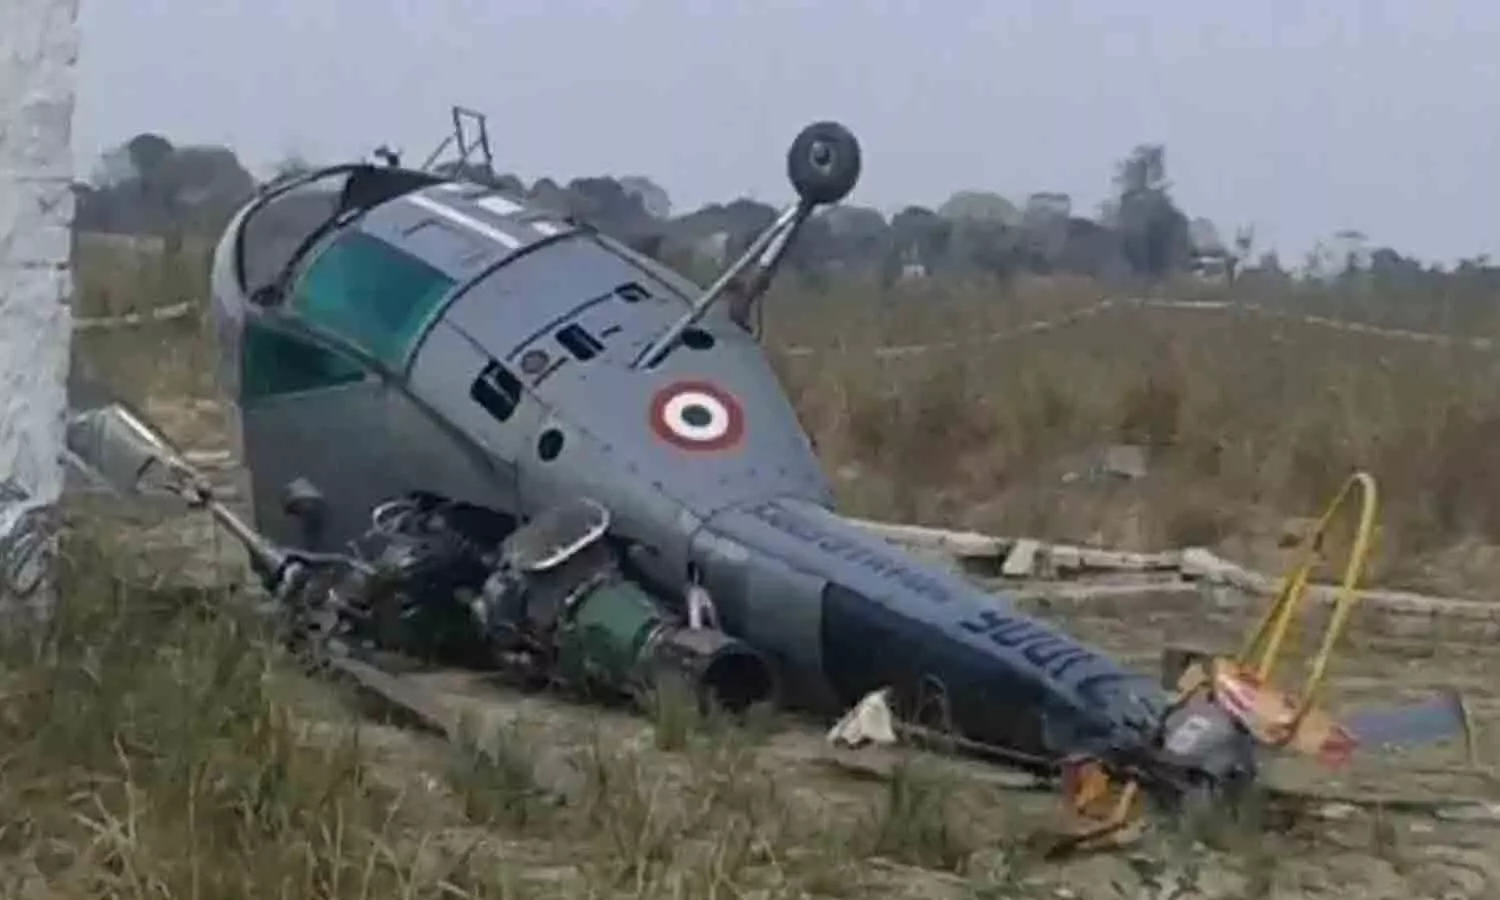 Jammu and Kashmir: Tragic accident in Bandipora, Indian Army helicopter crashes